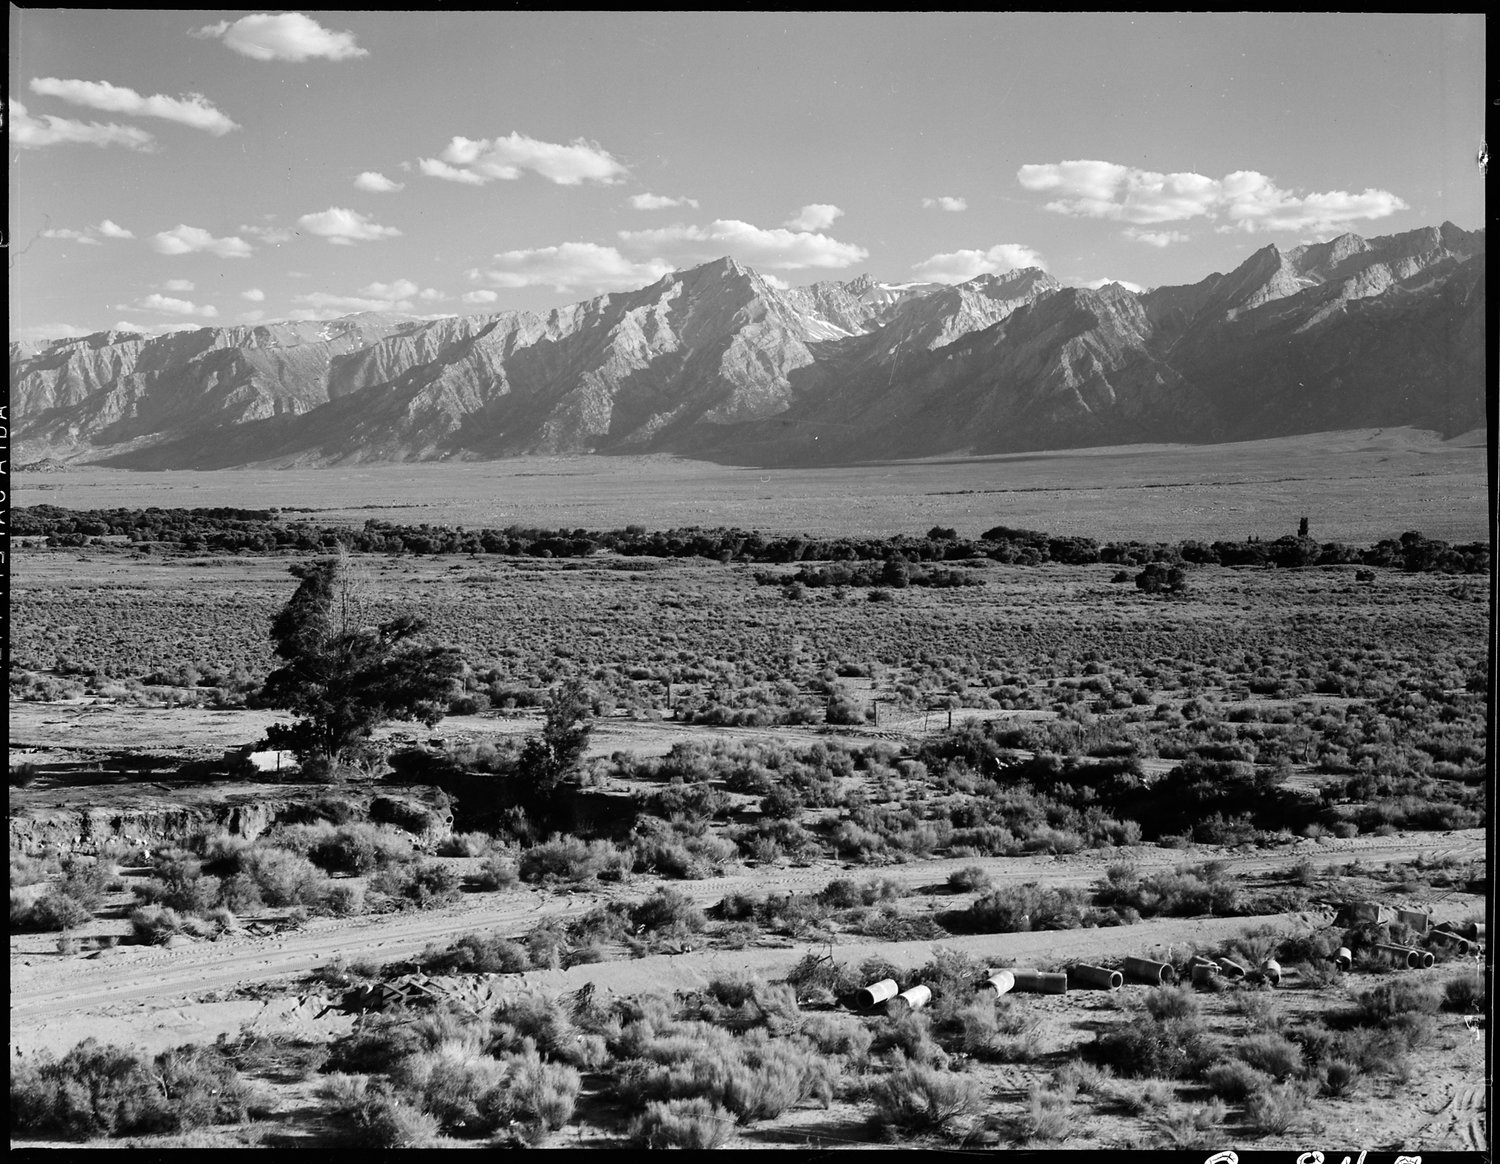 Manzanar Relocation Center, Manzanar, California. A view of surrounding country flanked by beautiful mountains at this War Relocation Authority center.